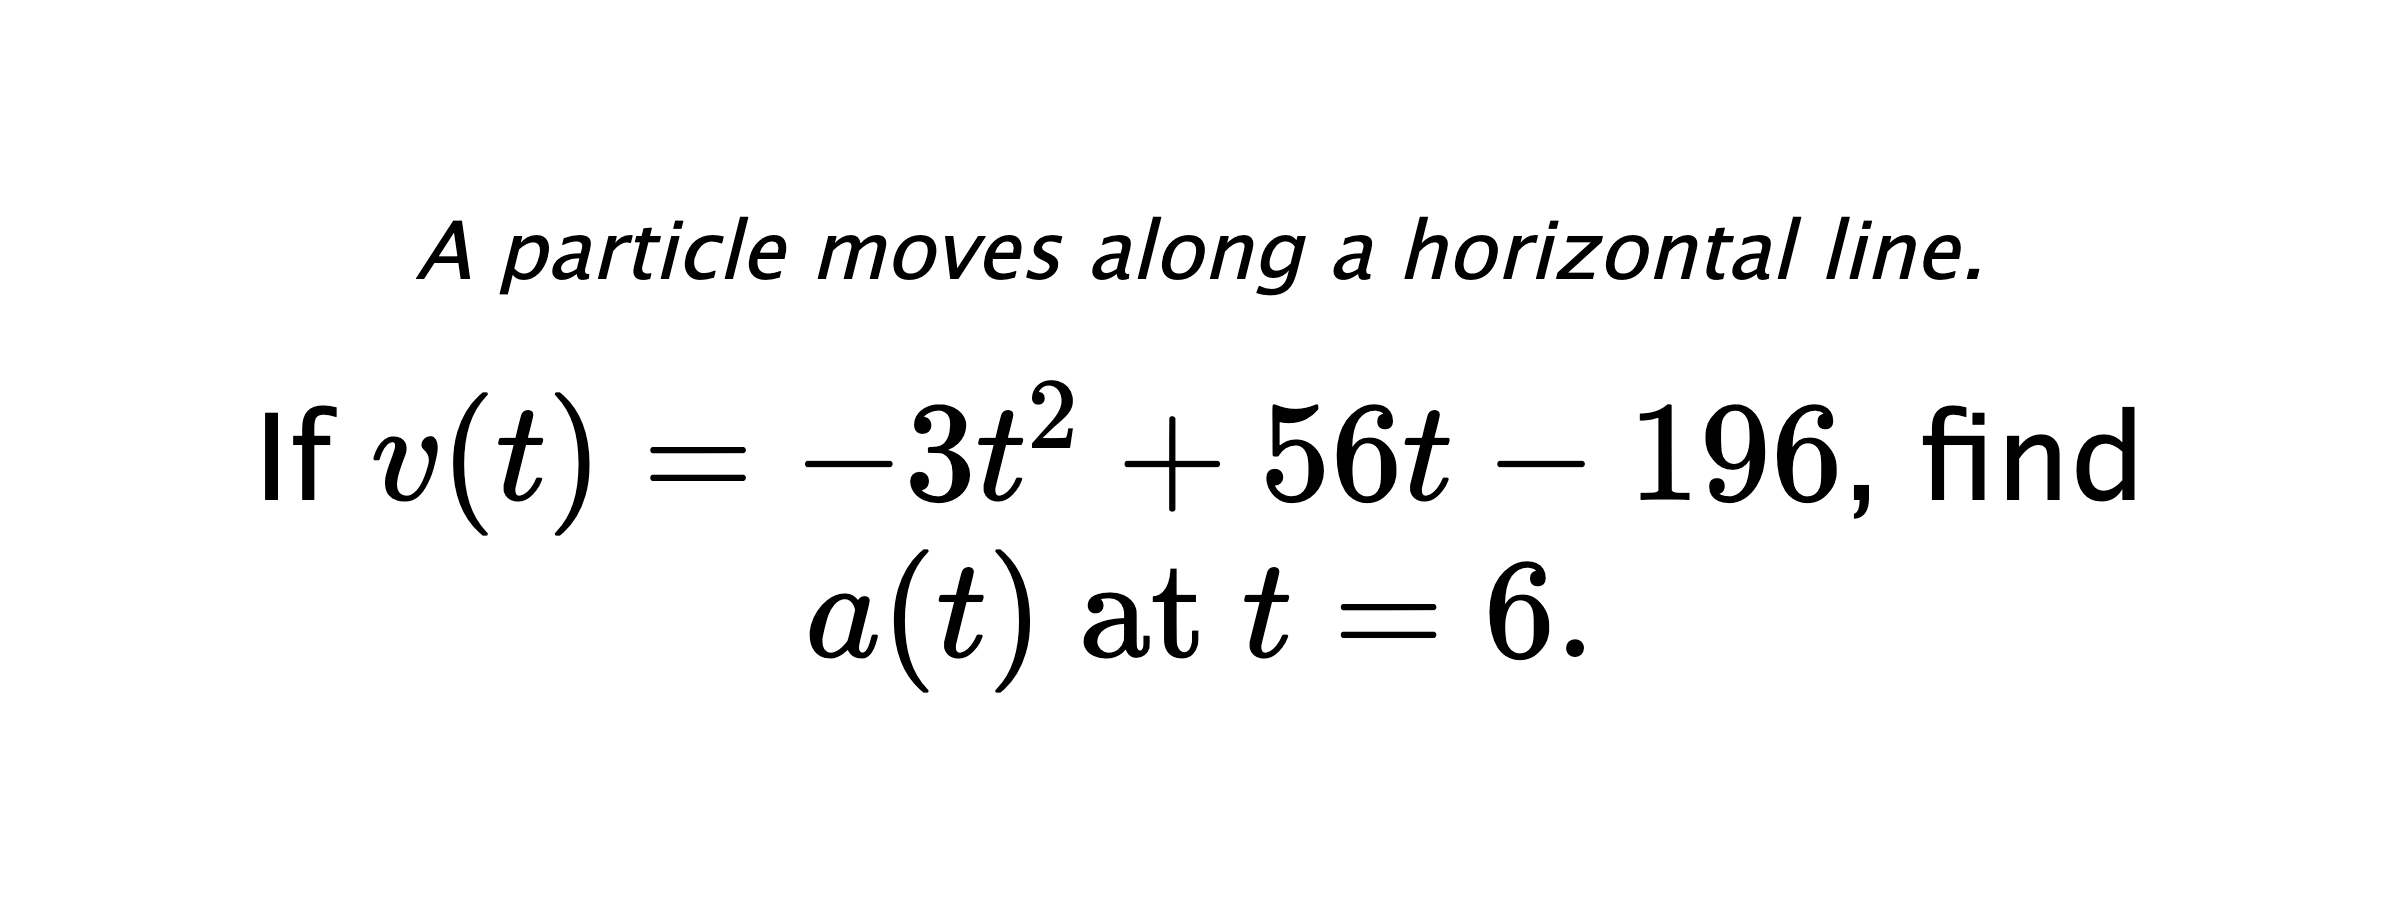 A particle moves along a horizontal line. If $ v(t)=-3t^2+56t-196 $, find $ a(t) \text{ at } t=6. $